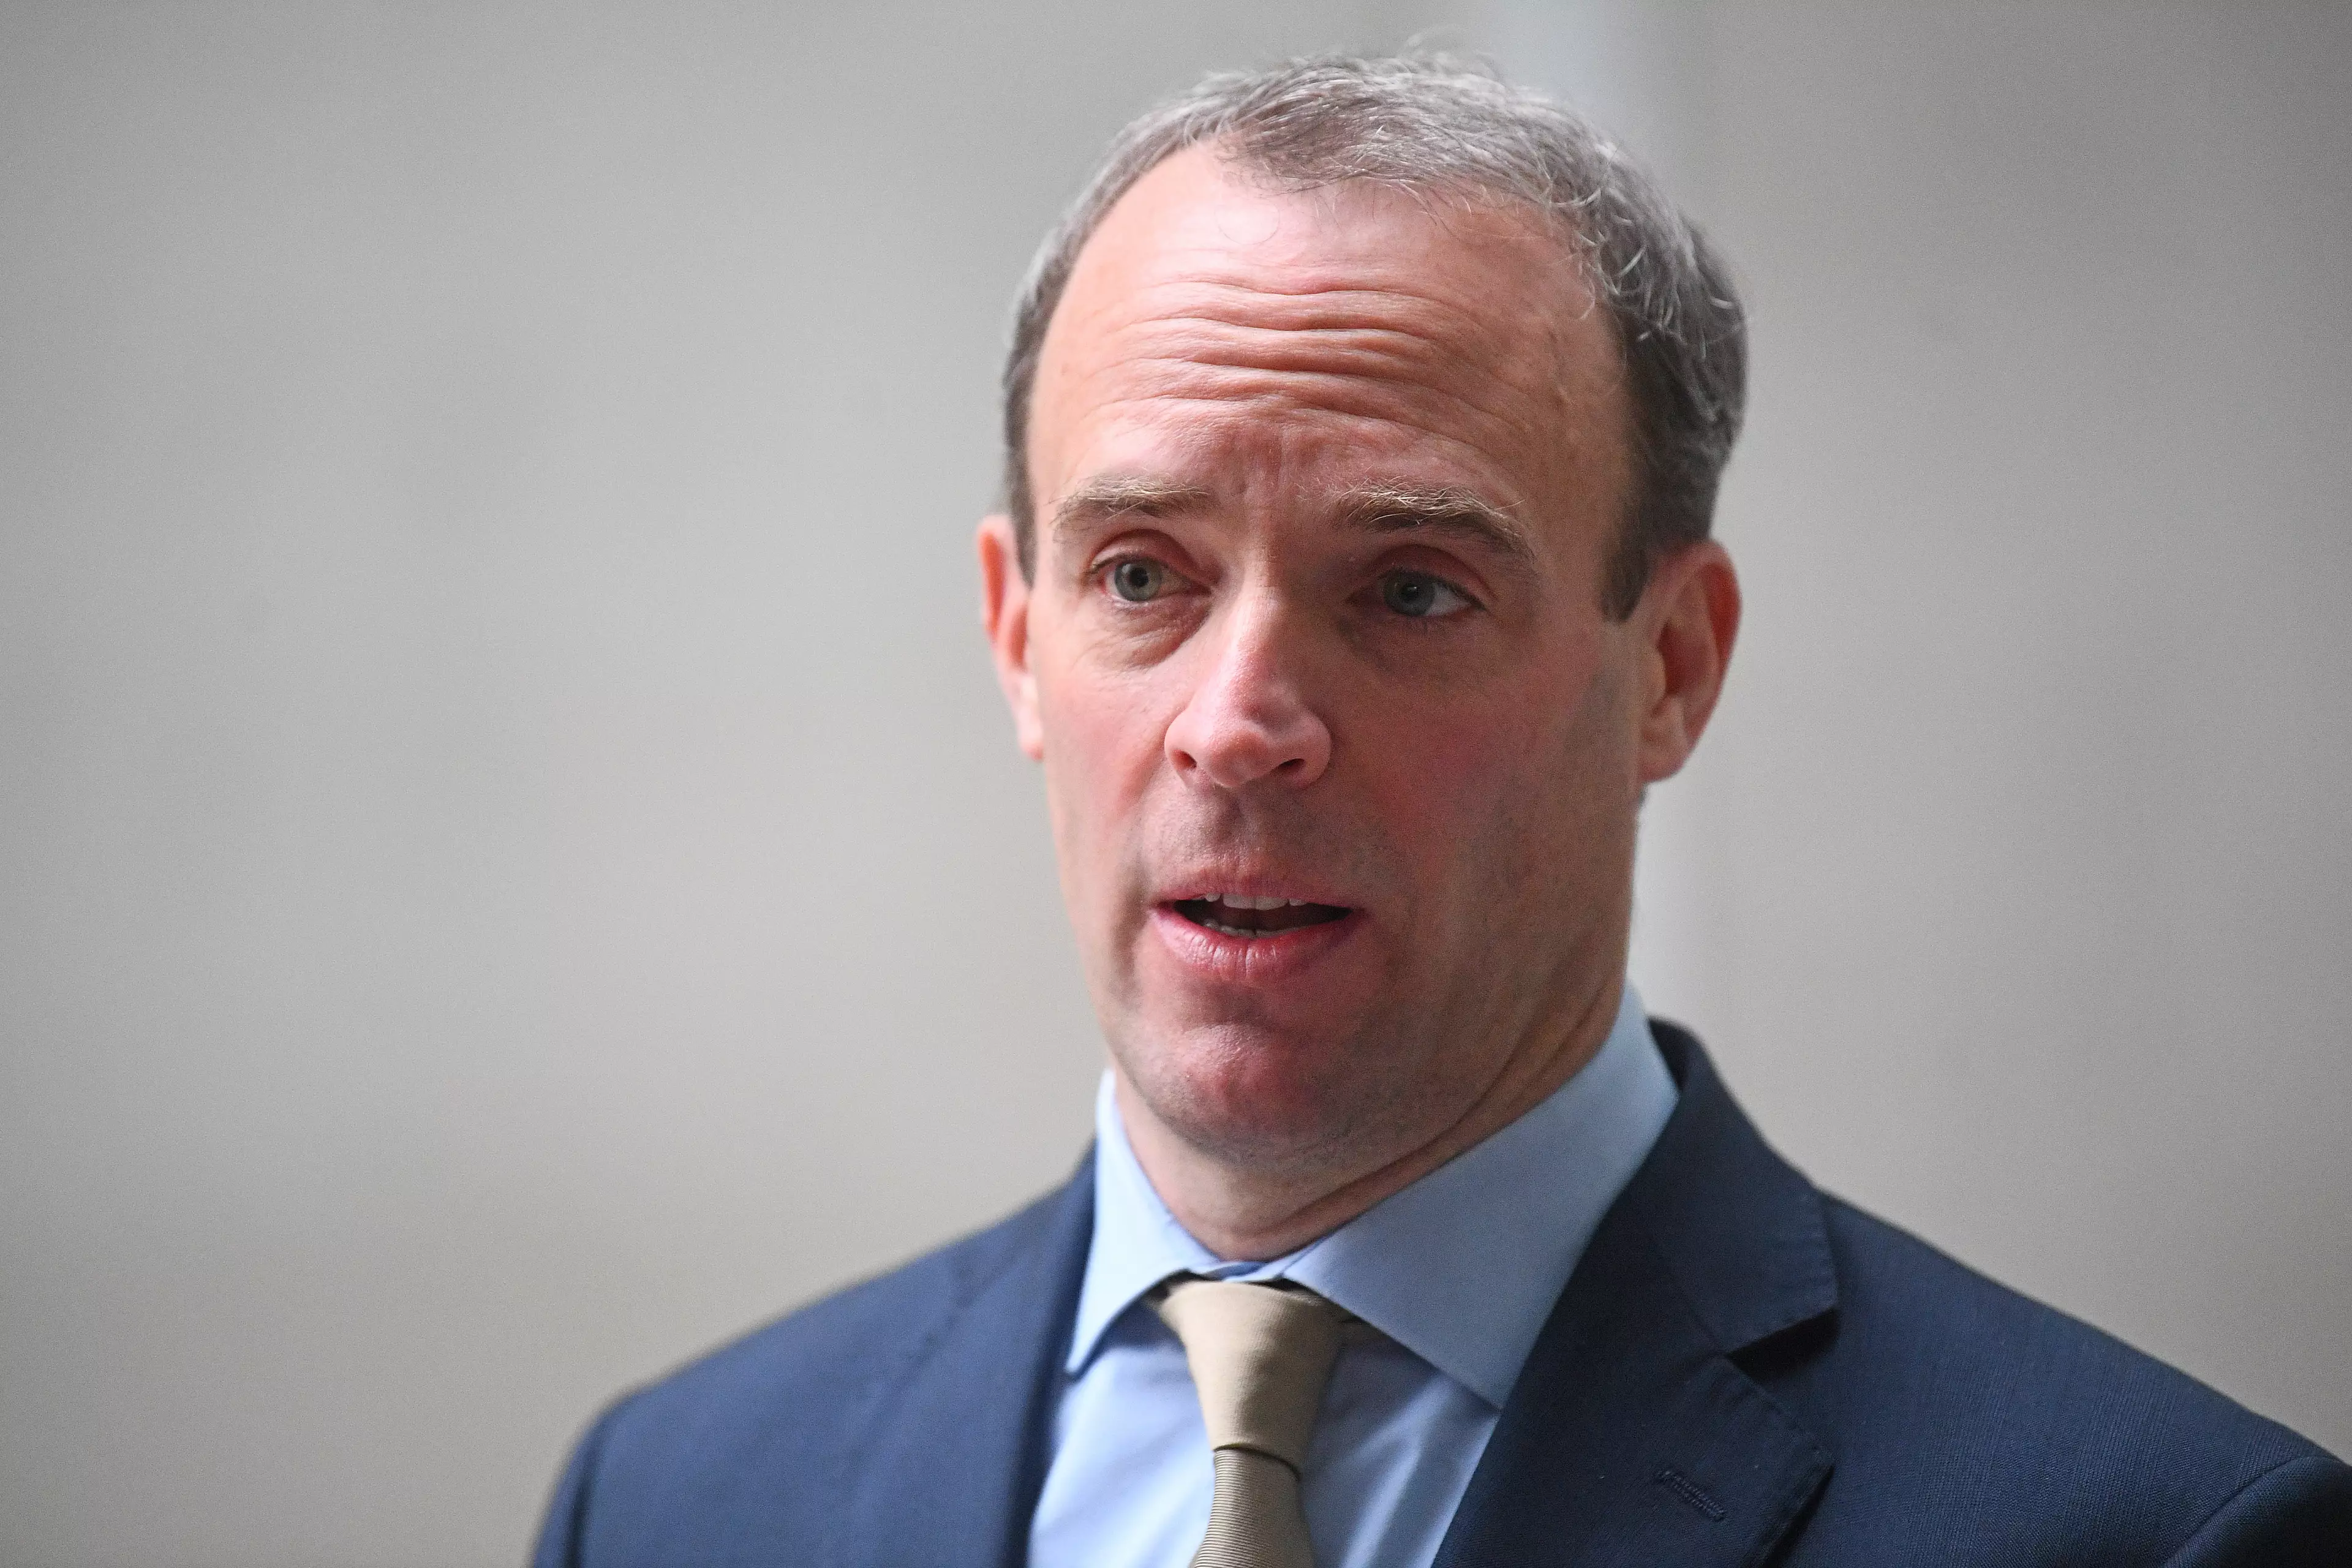 Dominic Raab has confirmed the Christmas relaxation of Covid rules will go ahead.